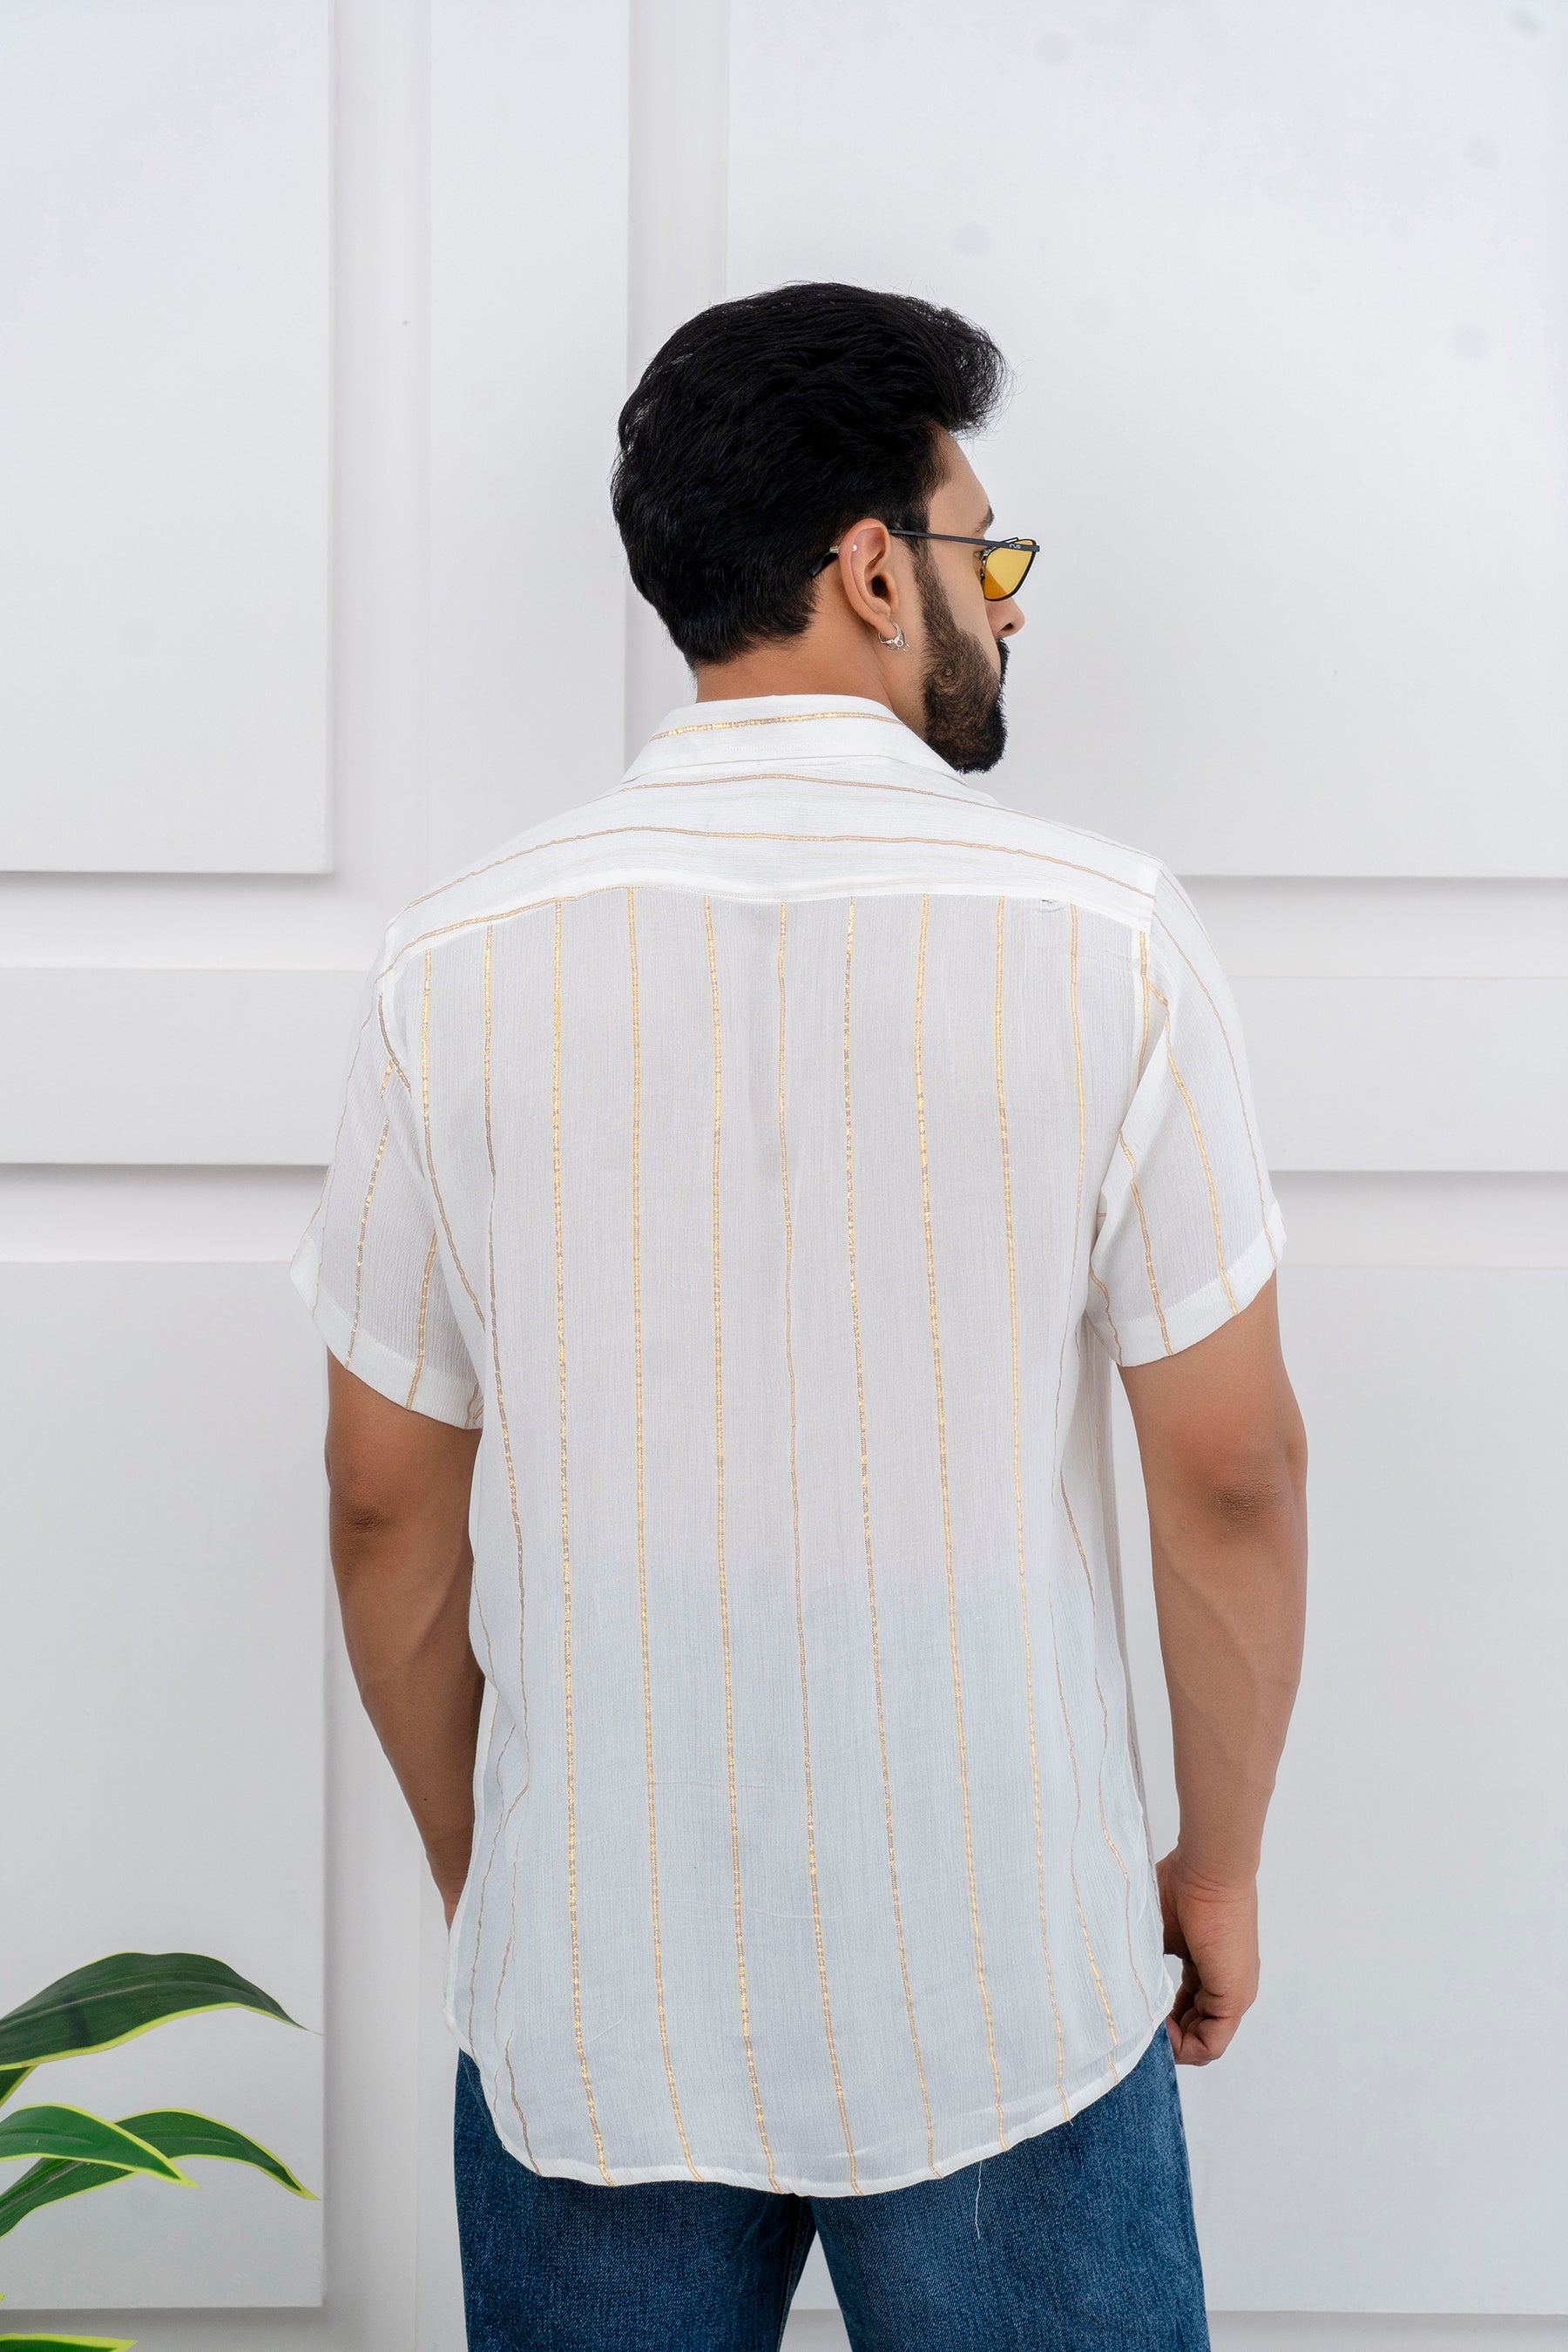 Firangi Yarn Relaxed Fit Super Flowy Re-engineered Cotton Lurex- Half Sleeves Party Shirt White and Gold